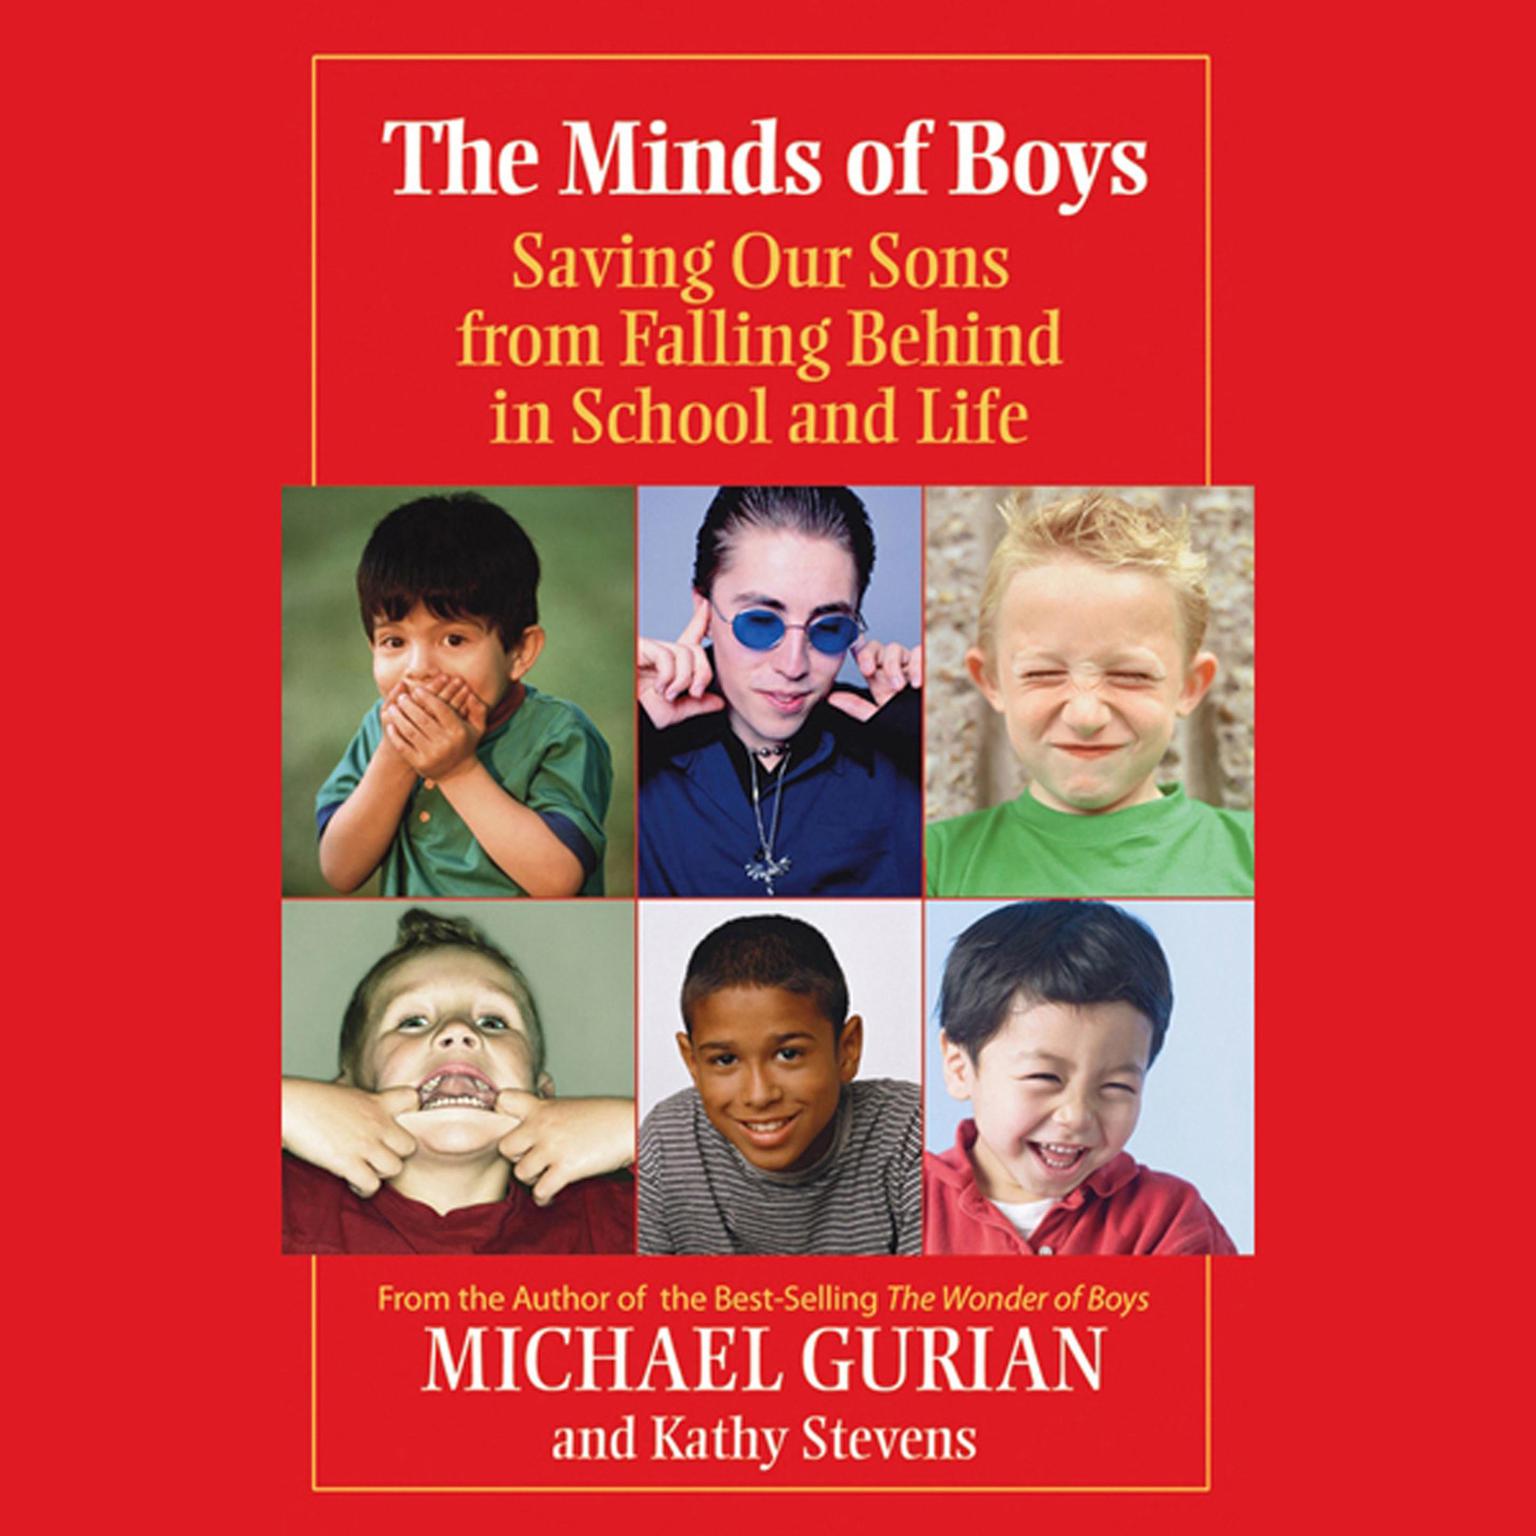 The Minds of Boys: Saving Our Sons From Falling Behind in School and Life Audiobook, by Michael Gurian